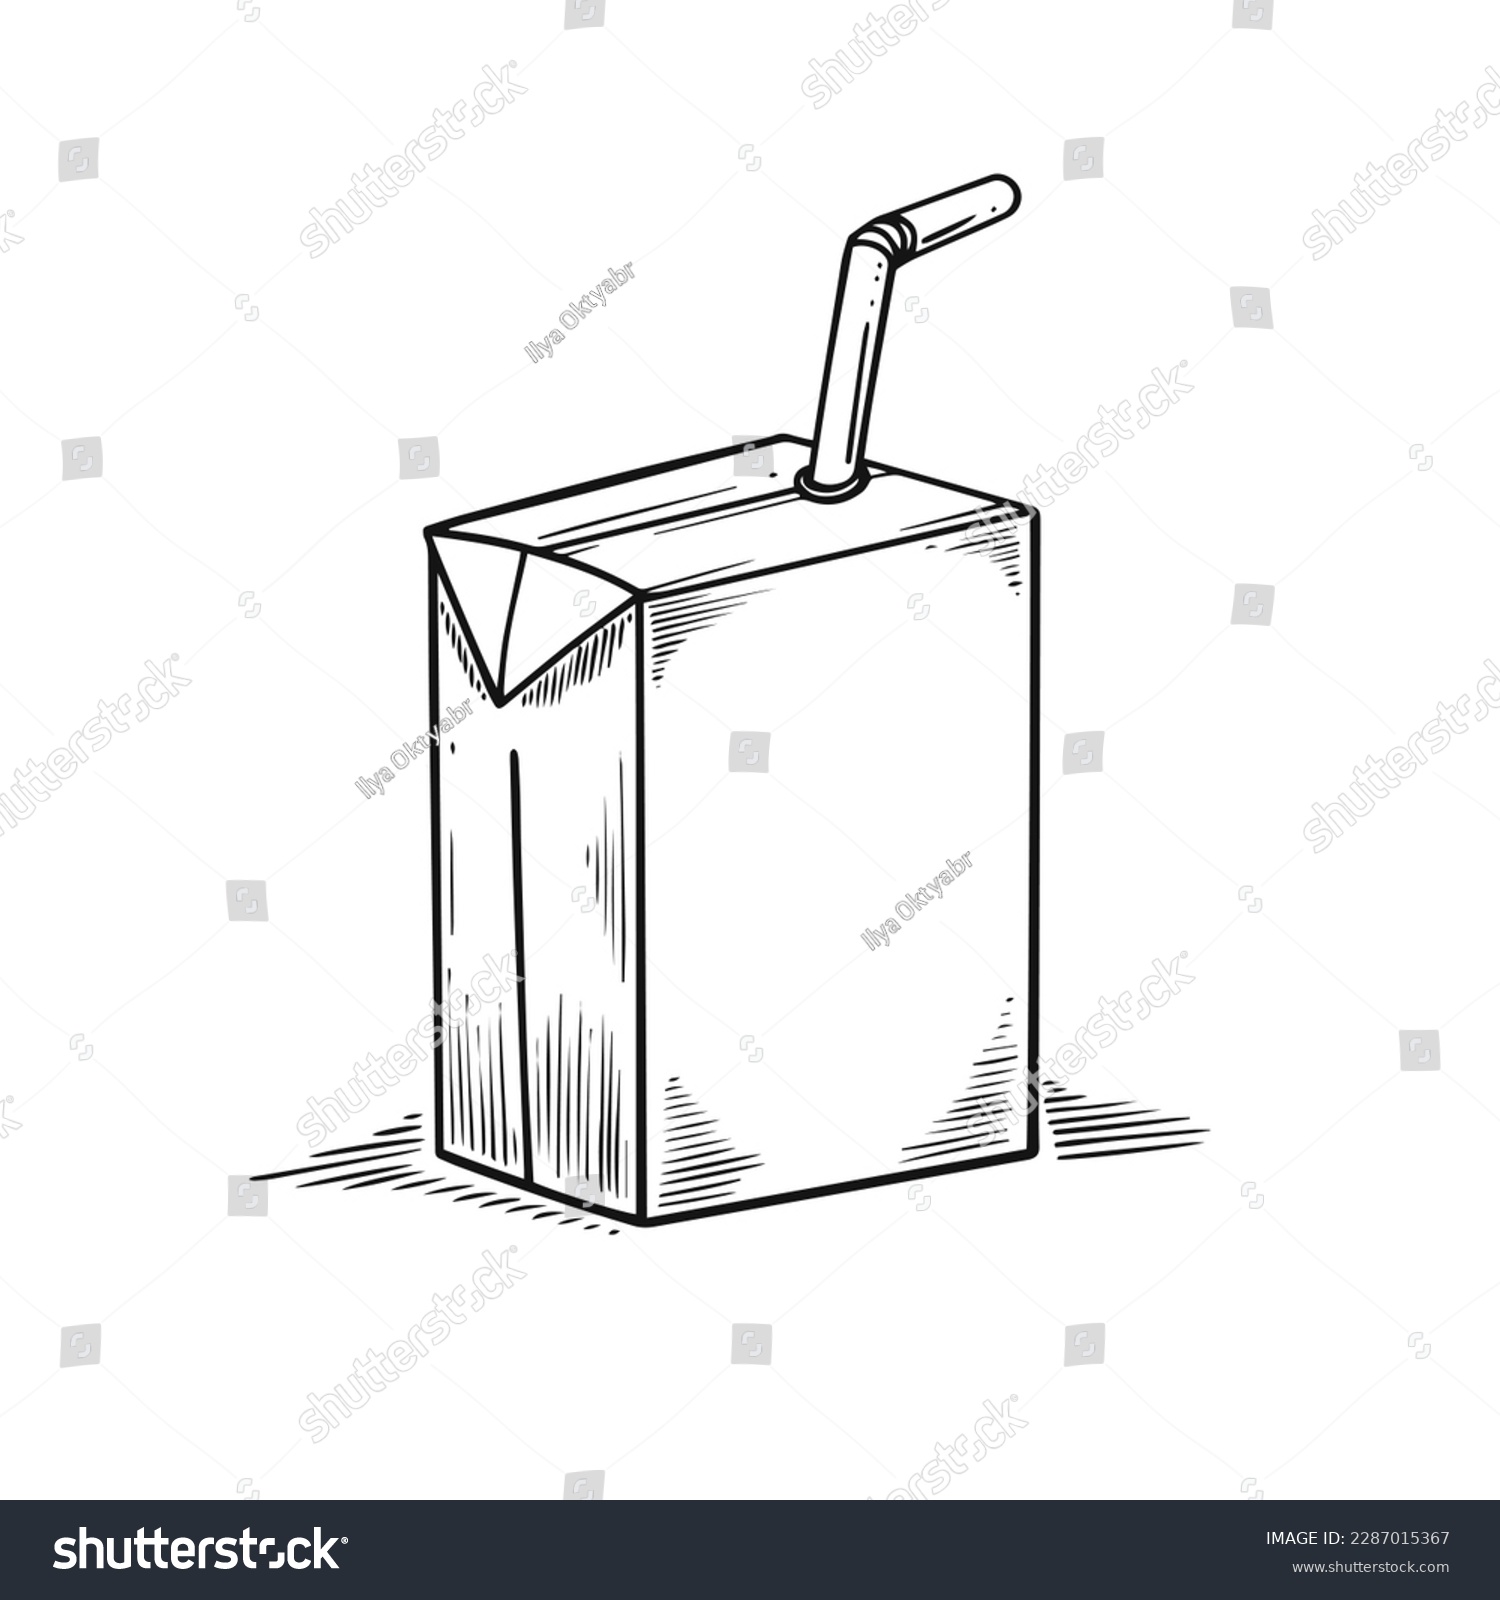 SVG of Juice or milk package box line art sketch style vector illustration isolated on white background. svg